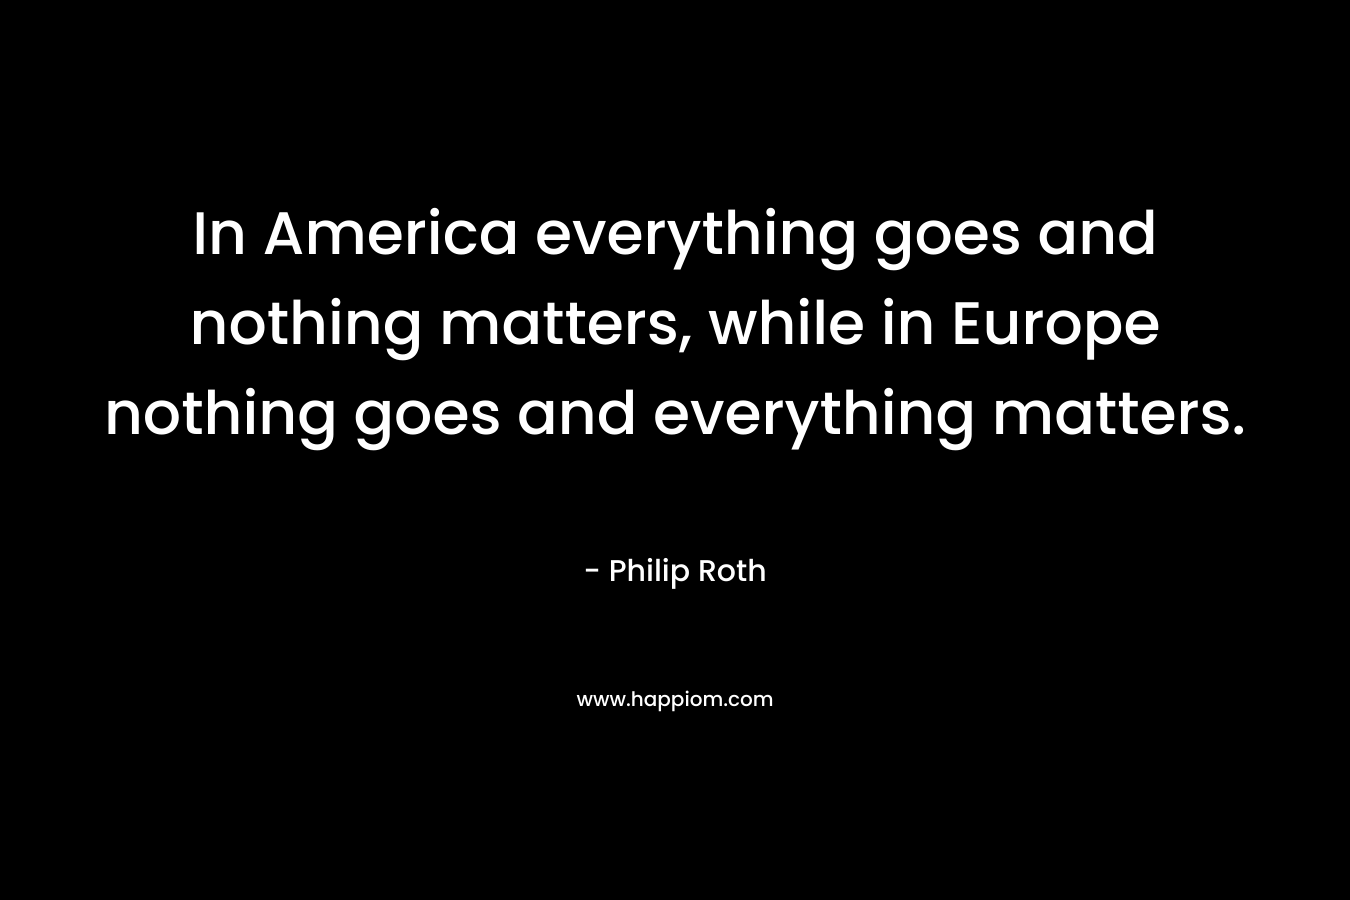 In America everything goes and nothing matters, while in Europe nothing goes and everything matters.